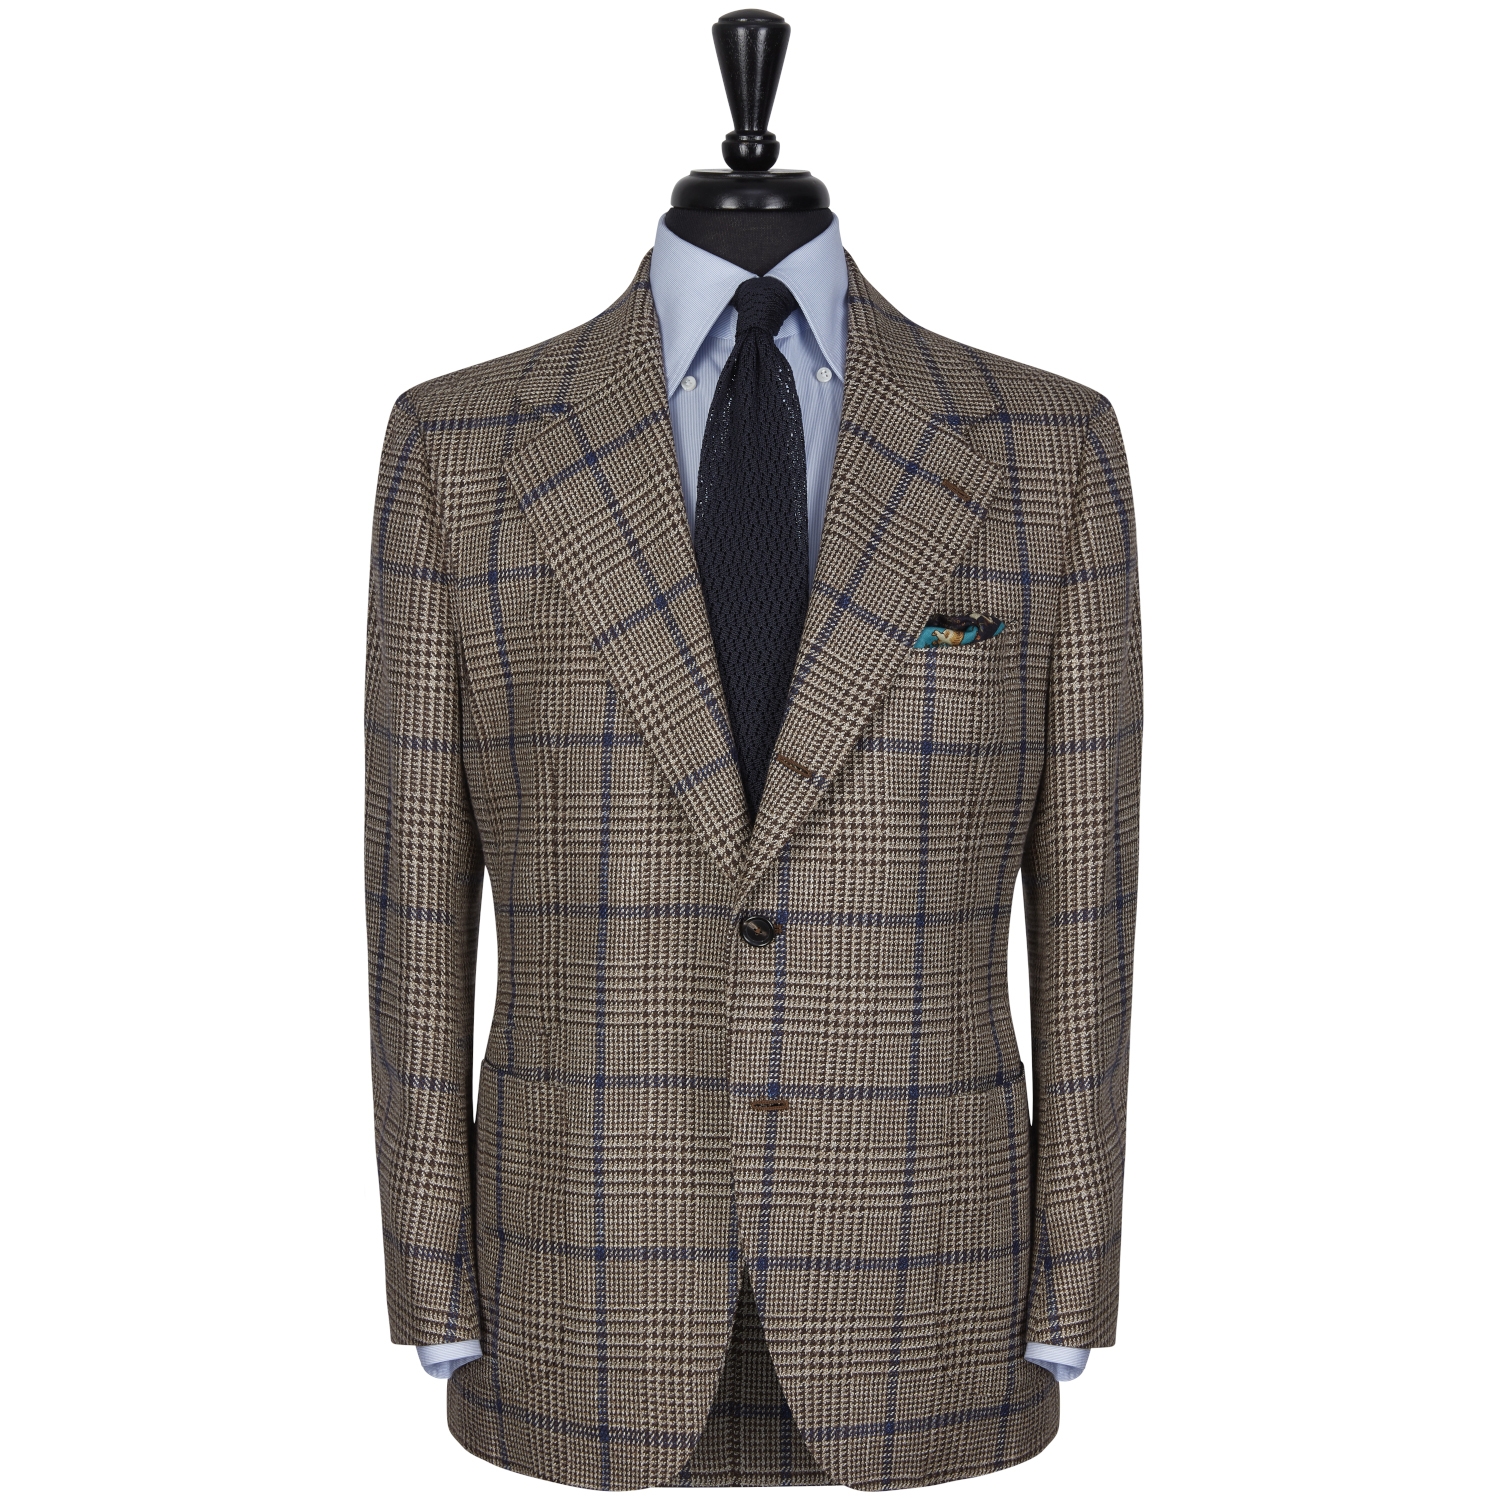 SSM17 – PATTERNED CHECK SINGLE BREASTED SPORTS JACKET – CACCIOPPOLI ...